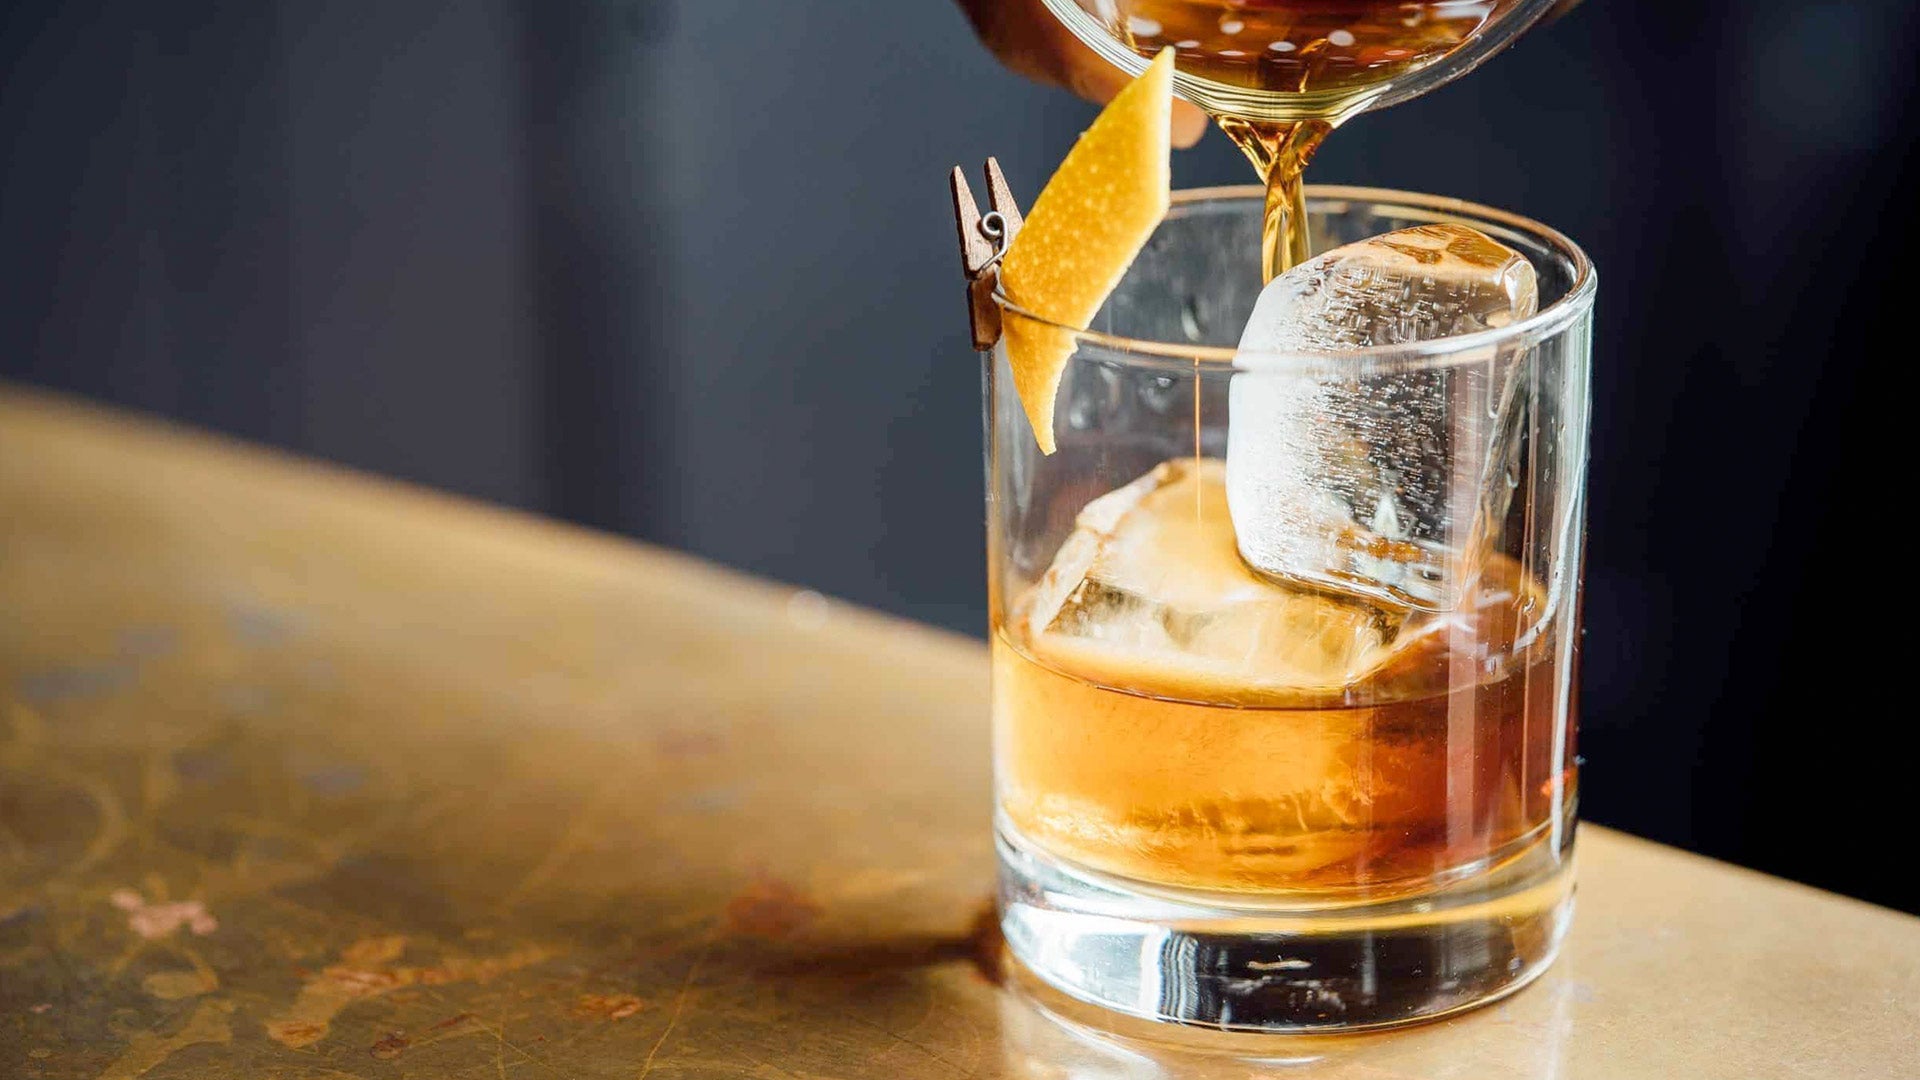 6 Recommended Whisky Cocktail Recipes to Try at Home